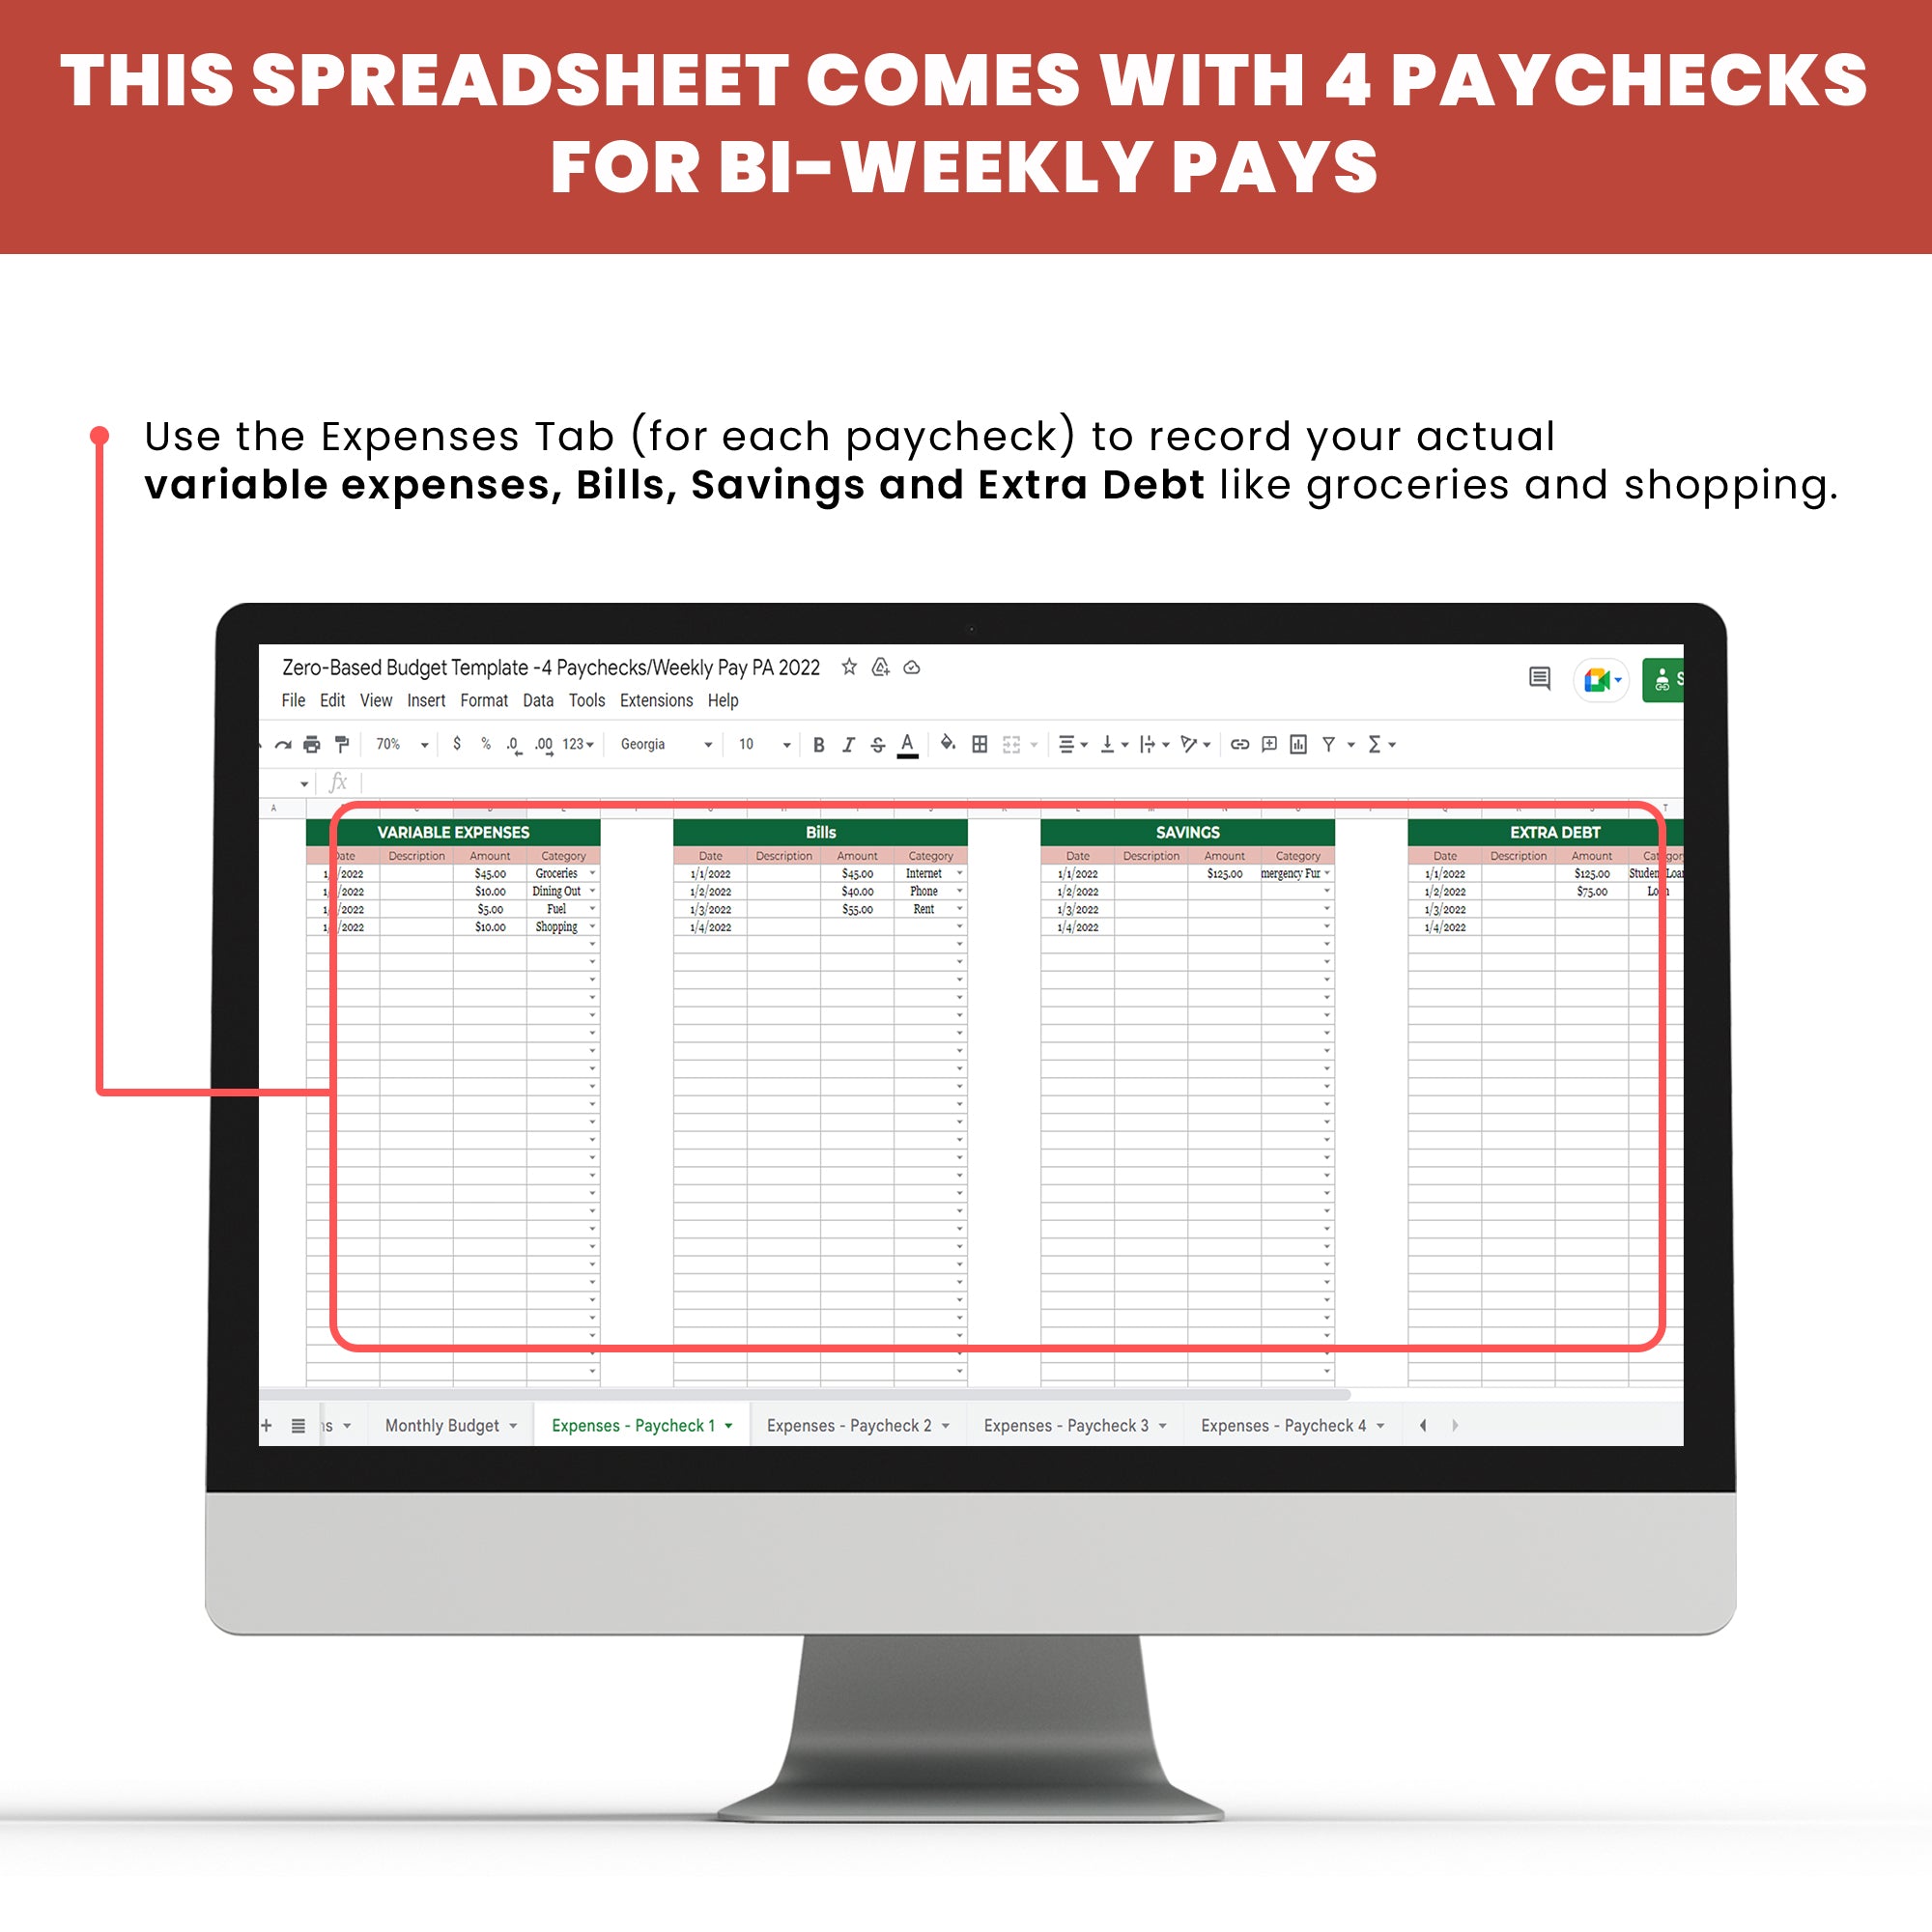 Zero-Based Budget Bi-Weekly 4 Paychecks Spreadsheet - Maximize Your Budget With This Easy To Use Spreadsheet